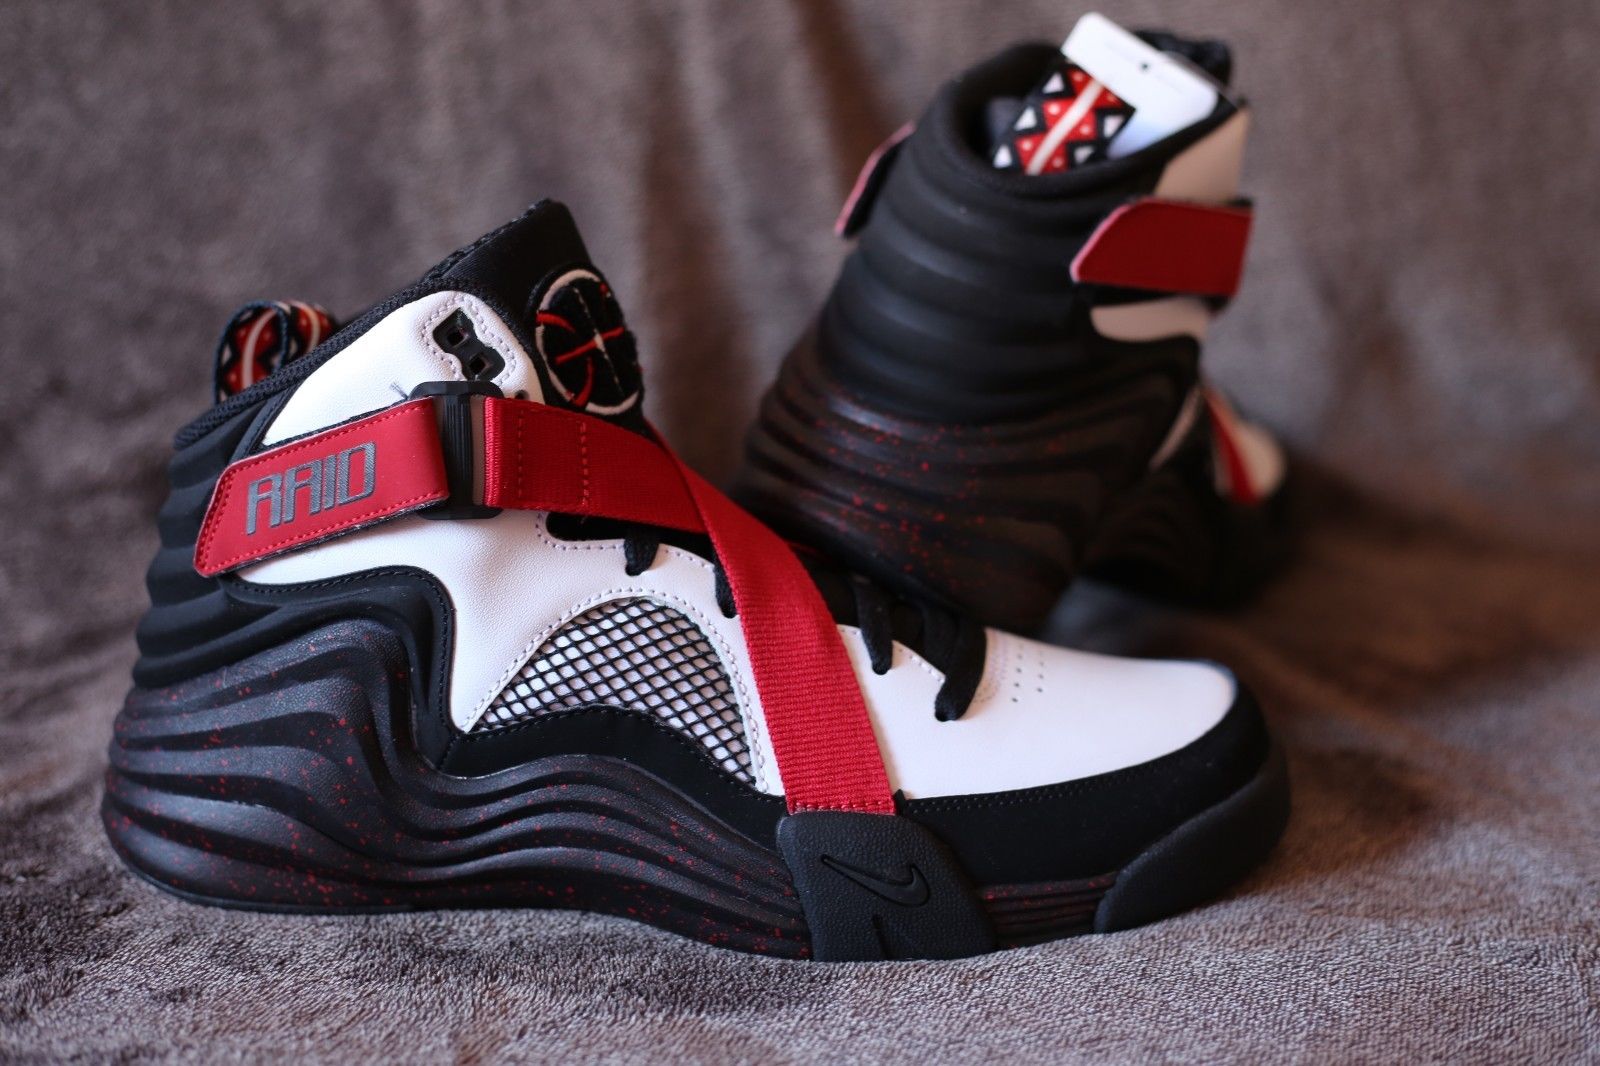 First Look at The 2014 Nike Lunar Raid | Sole Collector